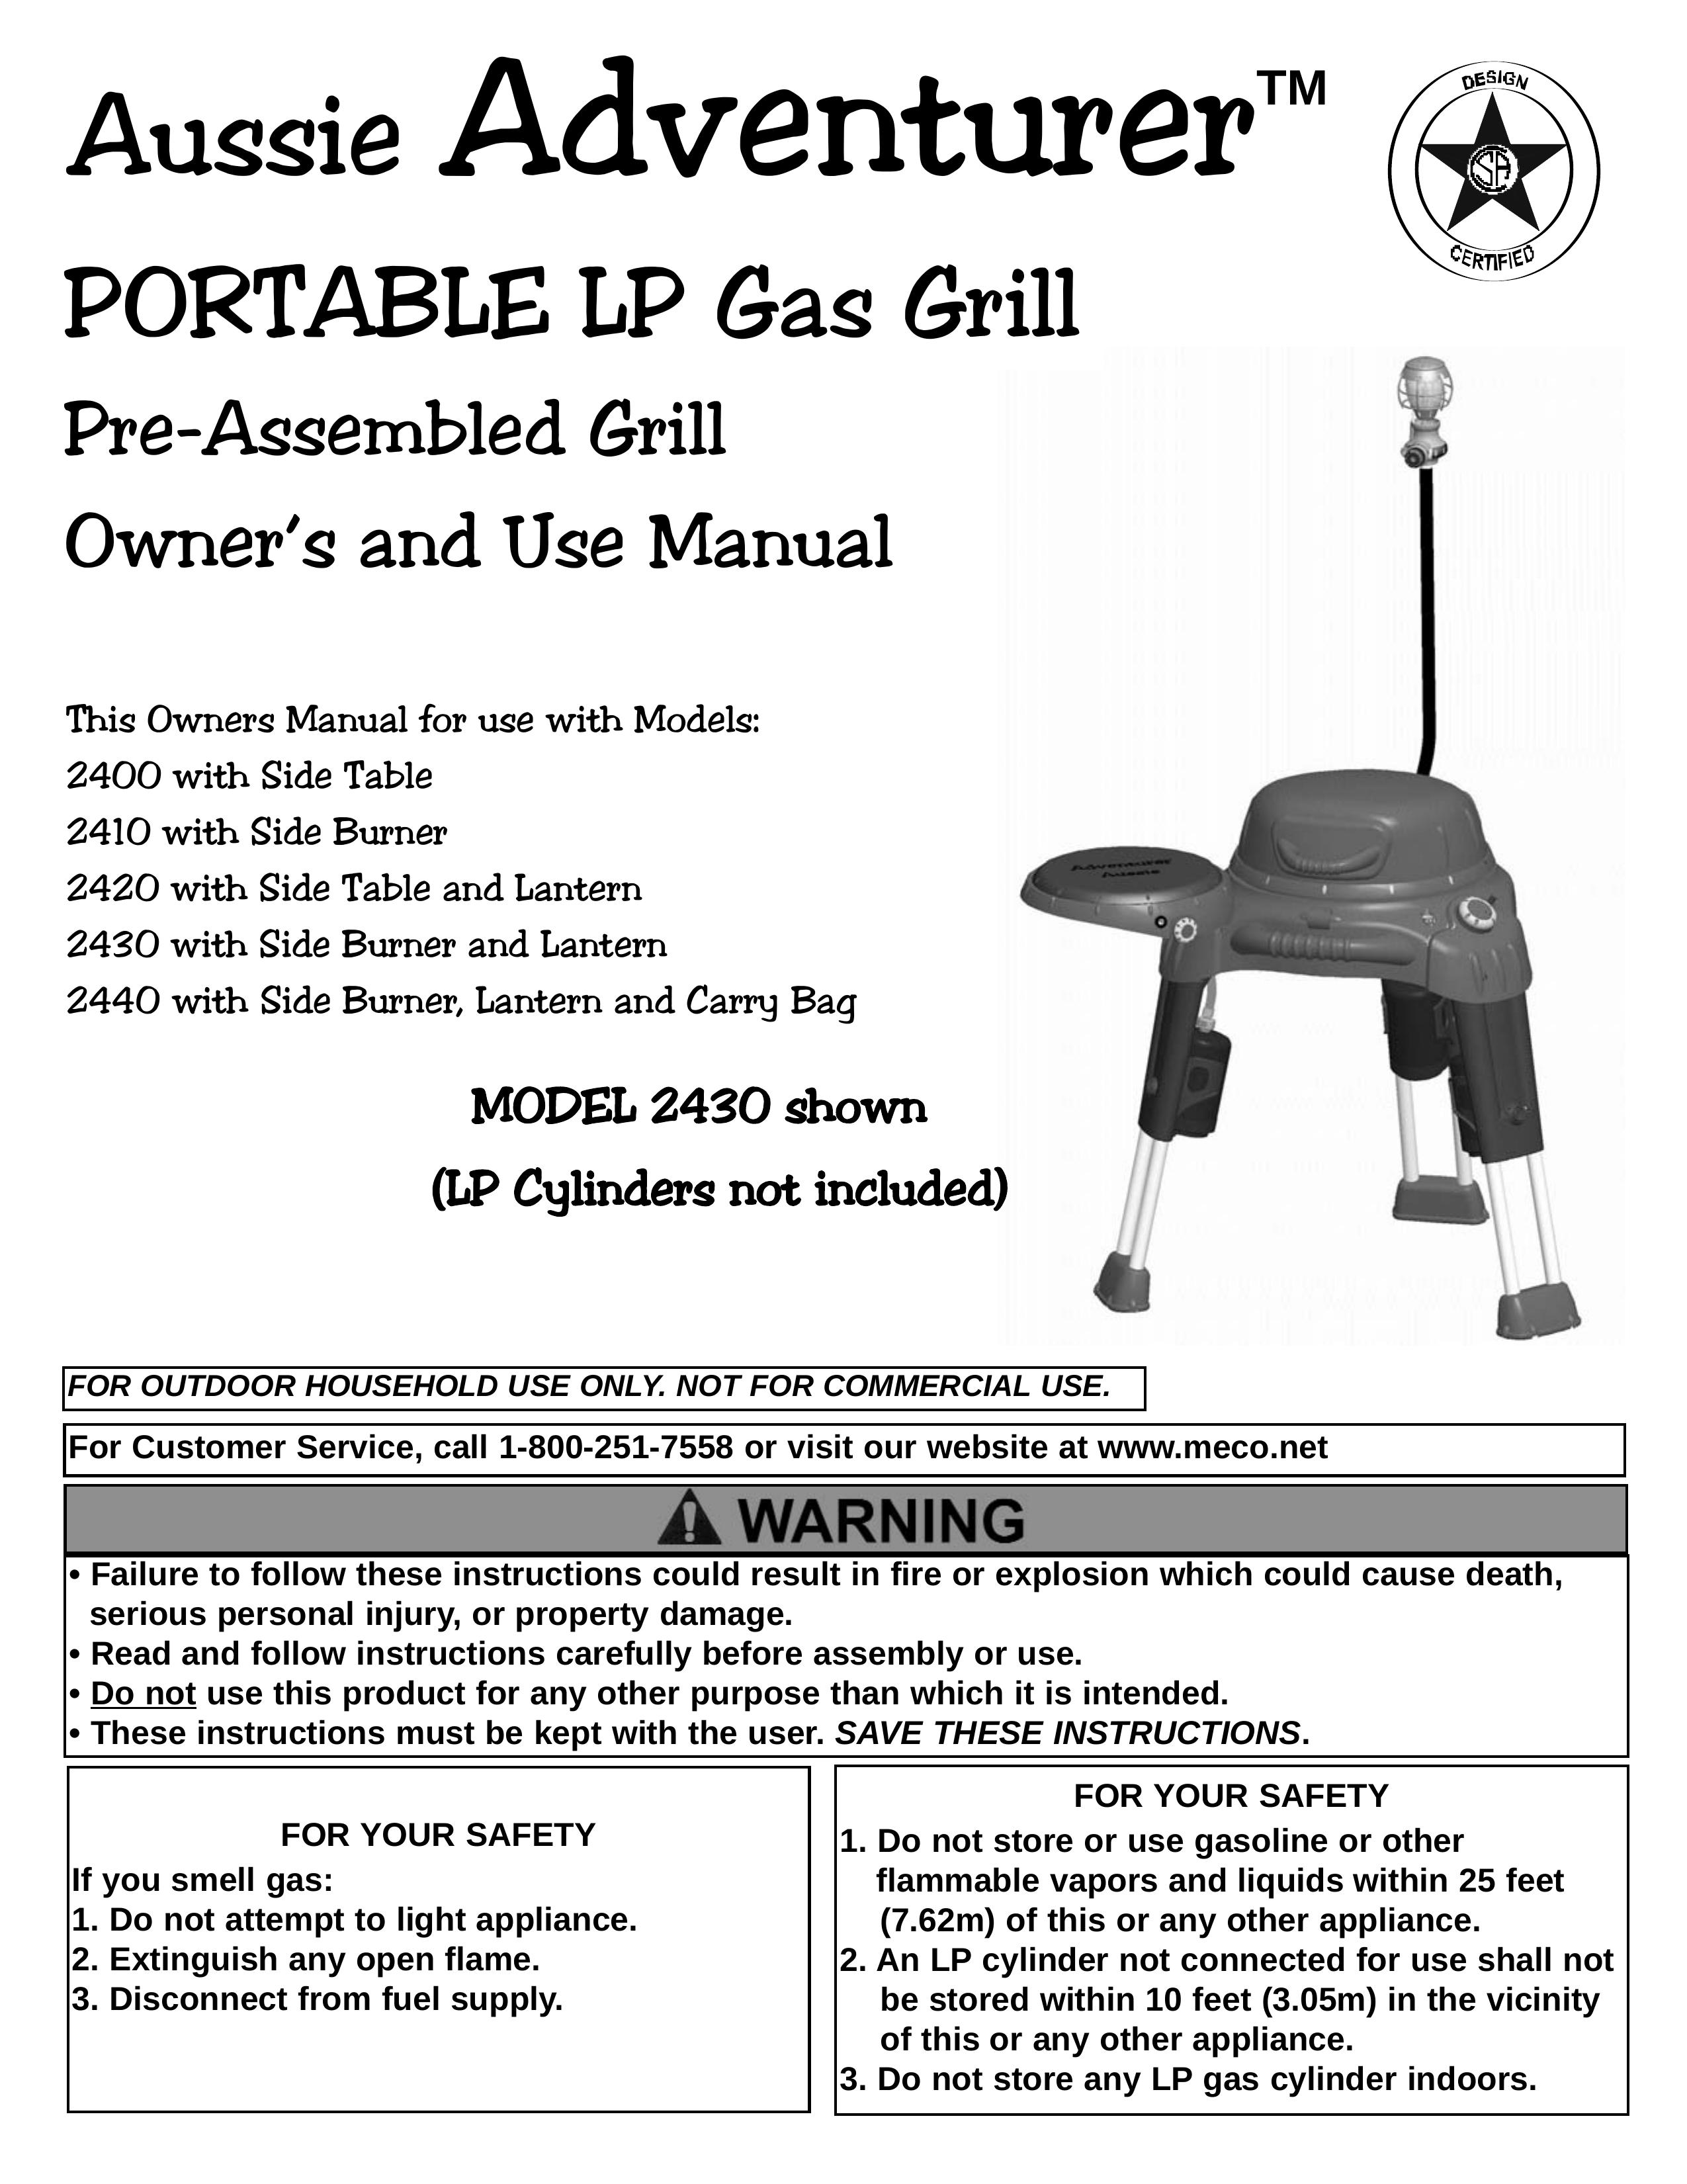 Meco 2440 Gas Grill User Manual